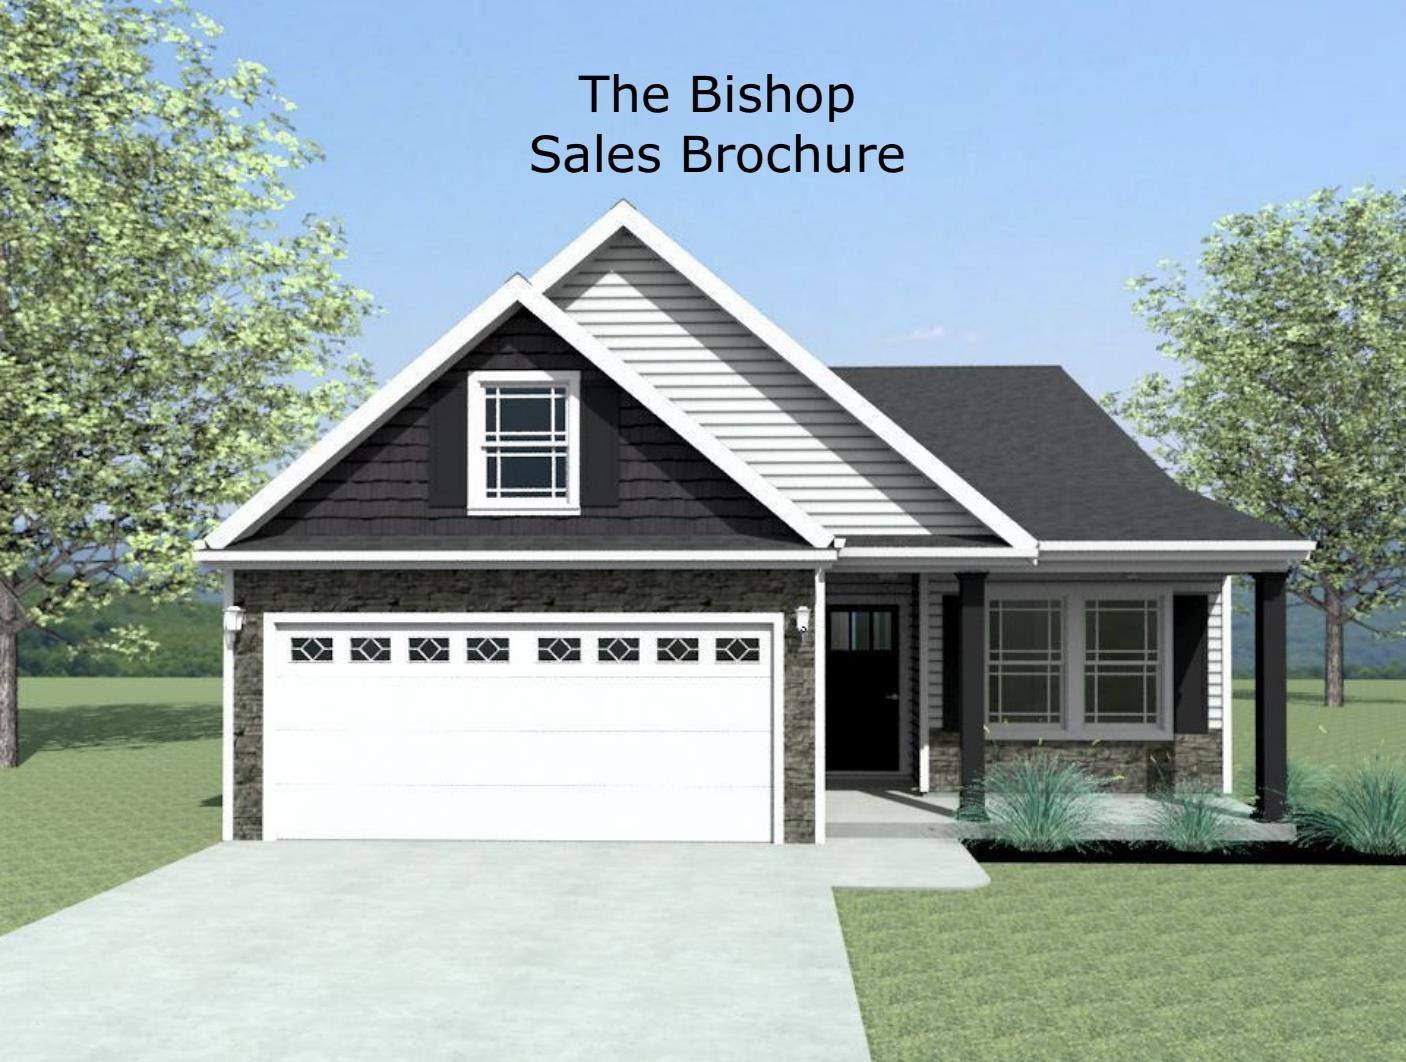 Welcome to Hampshire Heights! The Bishop floor plan offers an elegant entry way and open concept living. 3 bedroom, 2 bath plus a large sunroom! Home is complete with the trademark chair rail, crown molding and rope lighting.